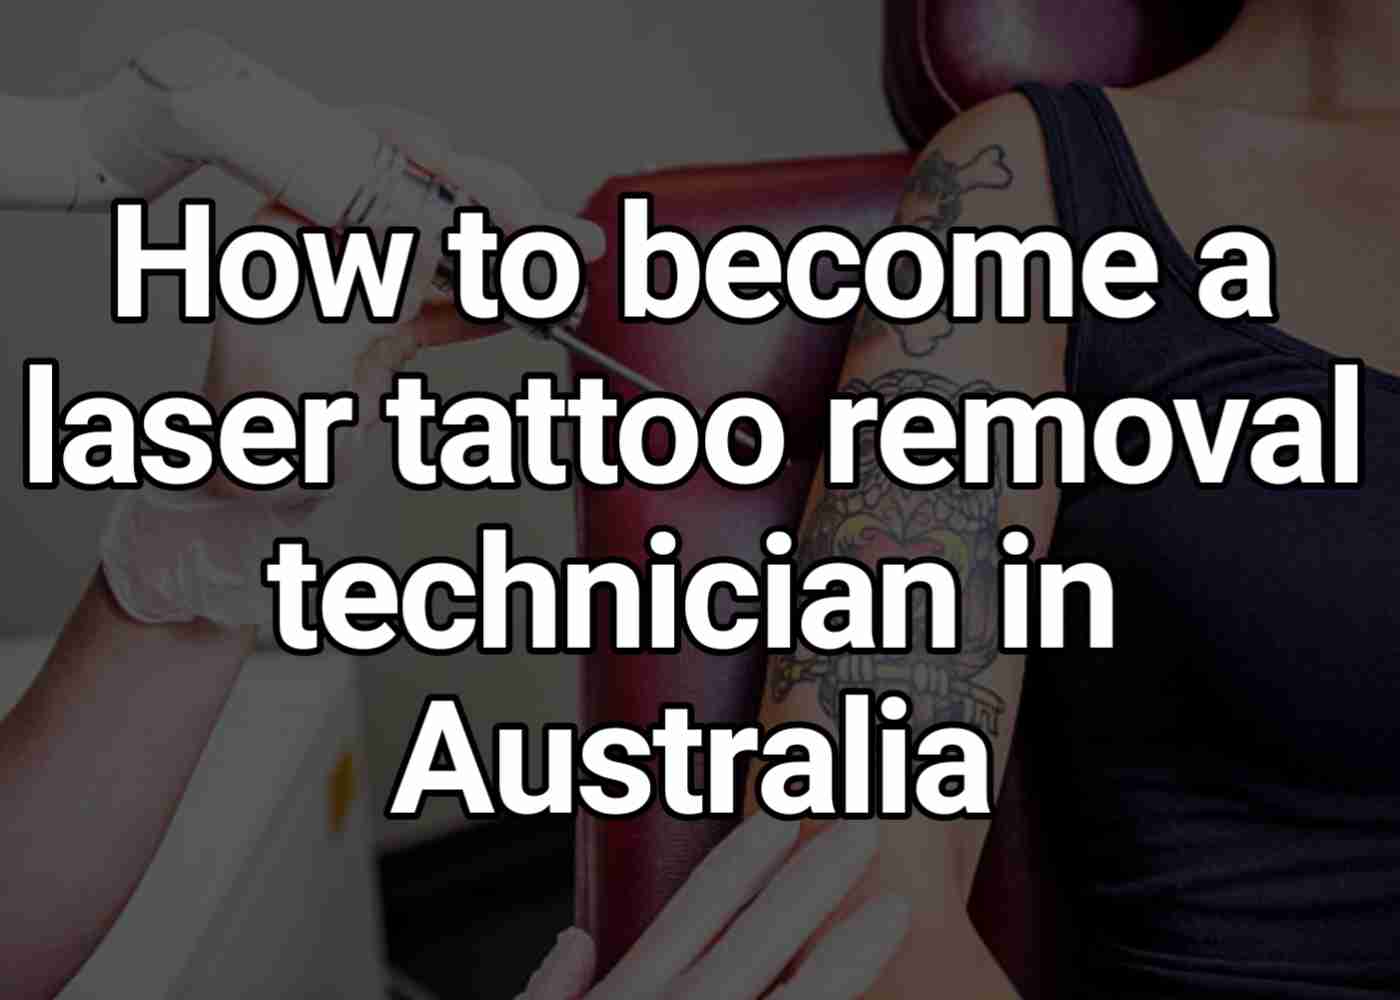 How to become a laser tattoo removal technician in Australia